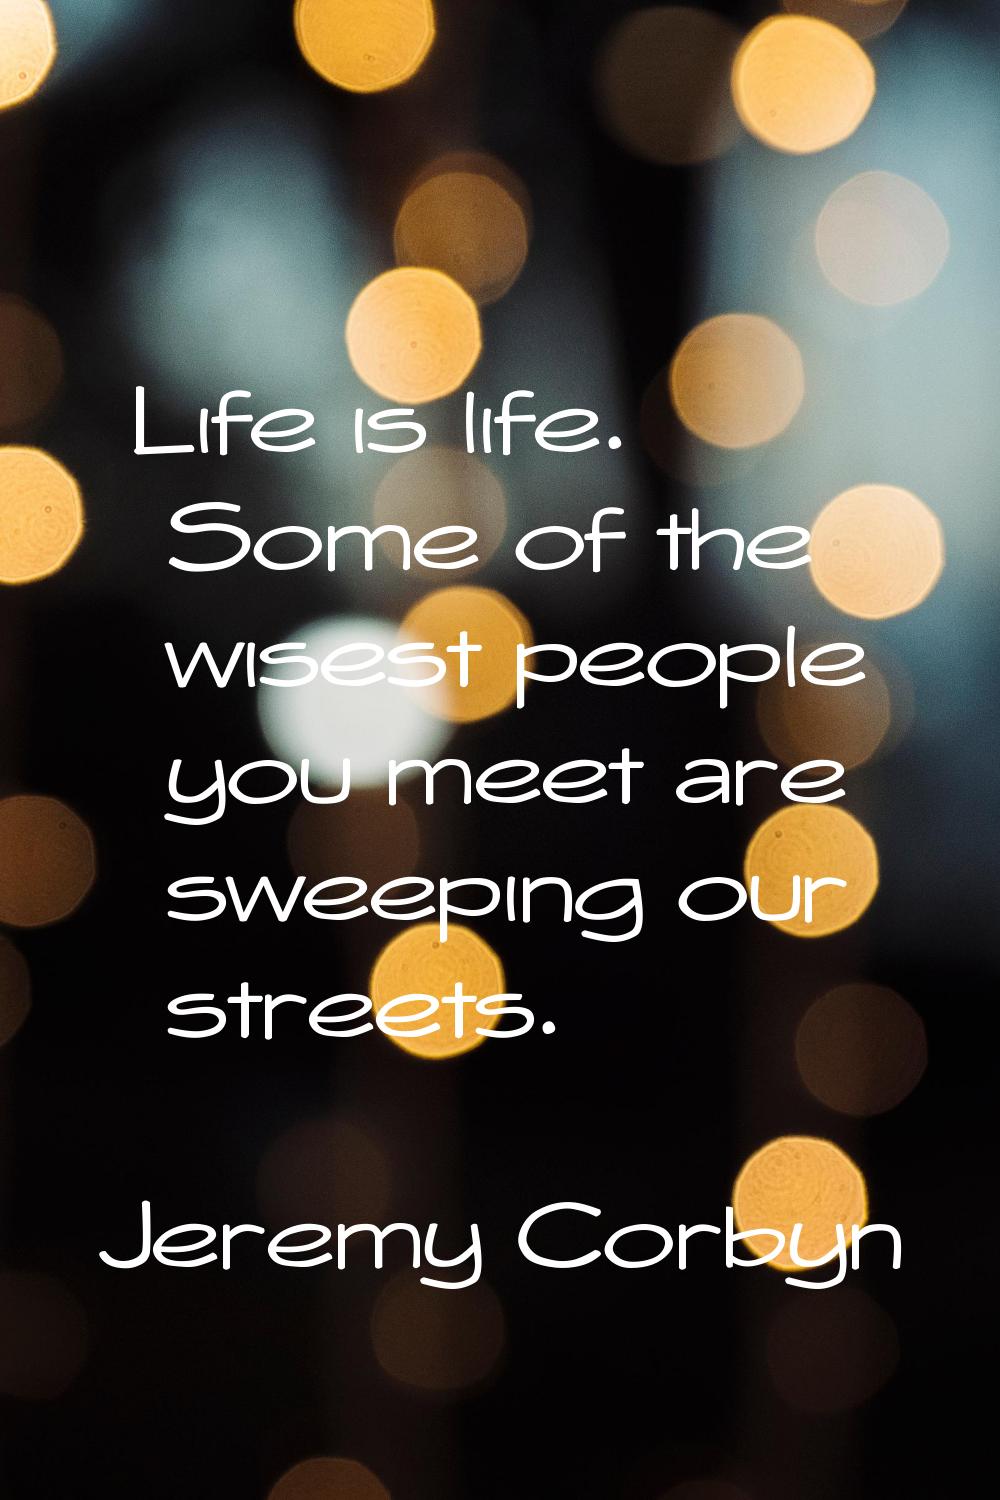 Life is life. Some of the wisest people you meet are sweeping our streets.